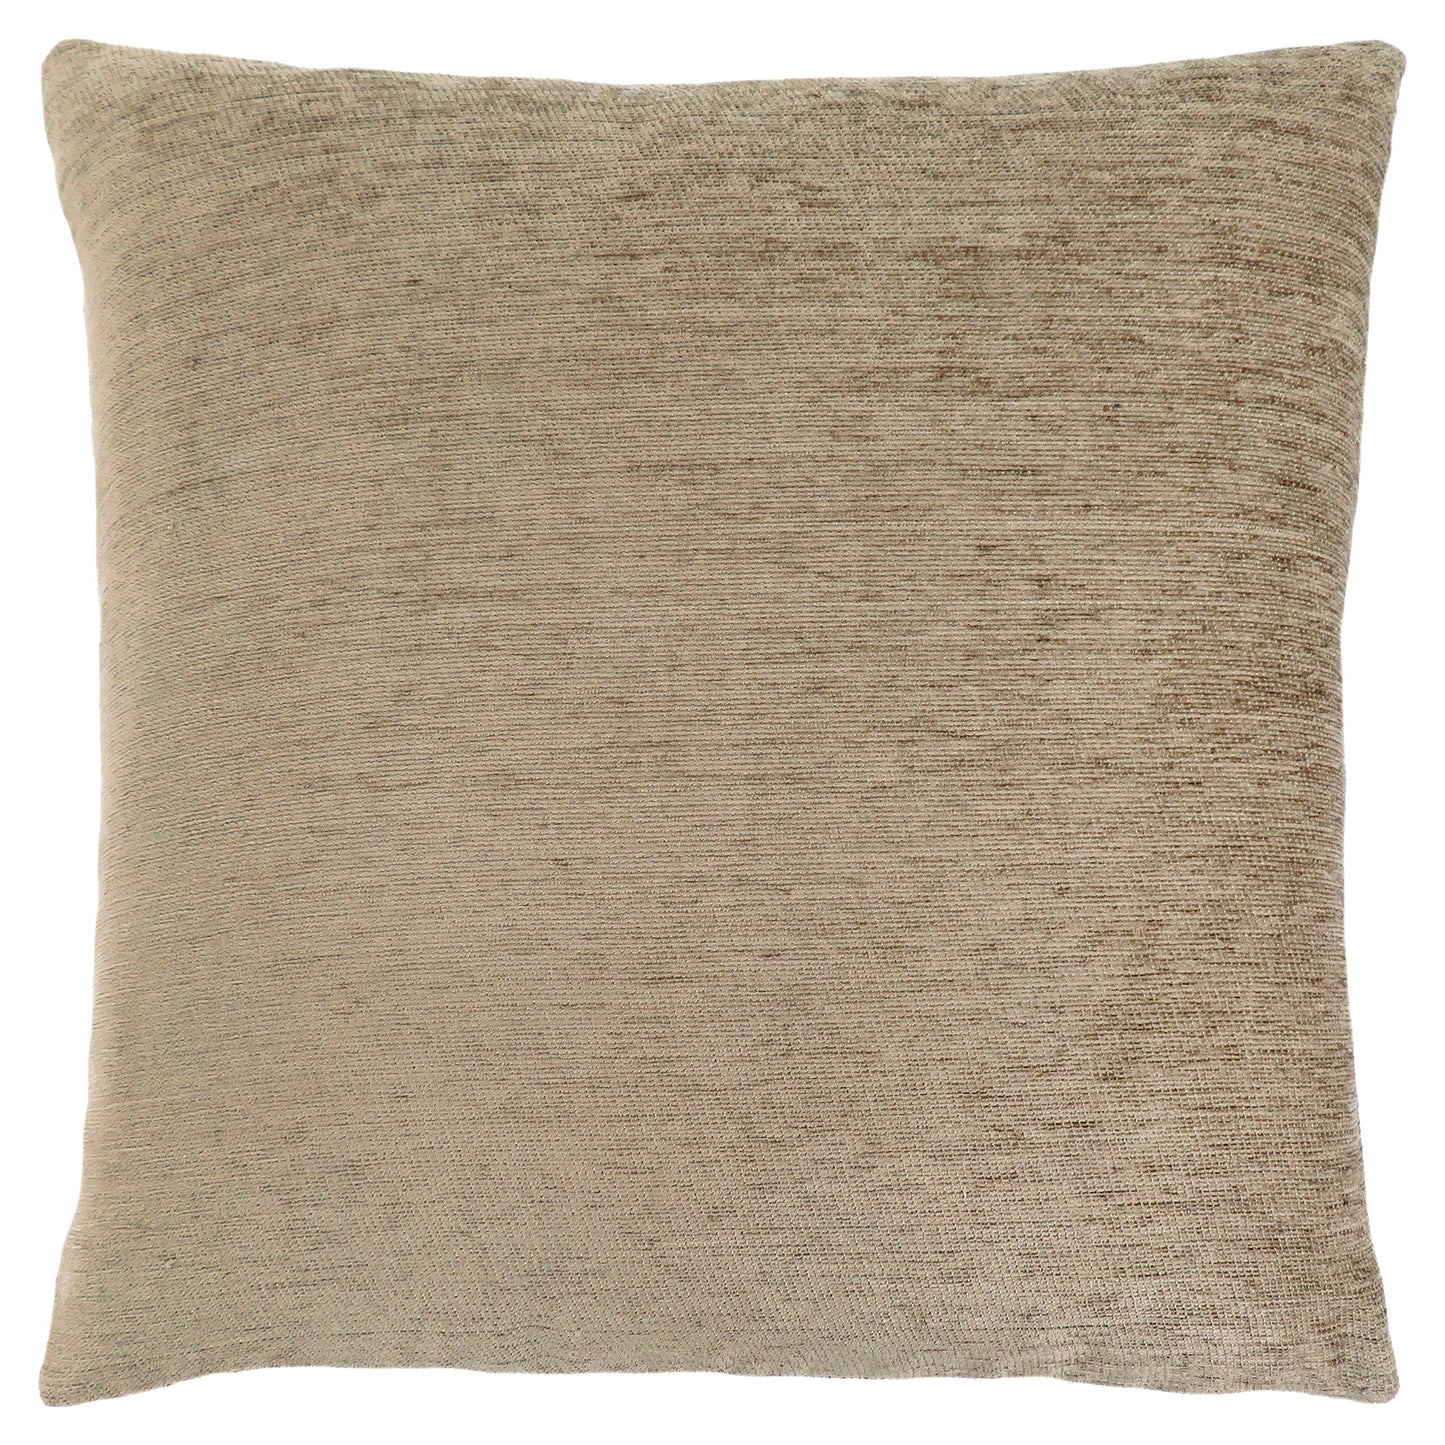 Set Of Two 18" X 18" Tan Polyester Zippered Pillow